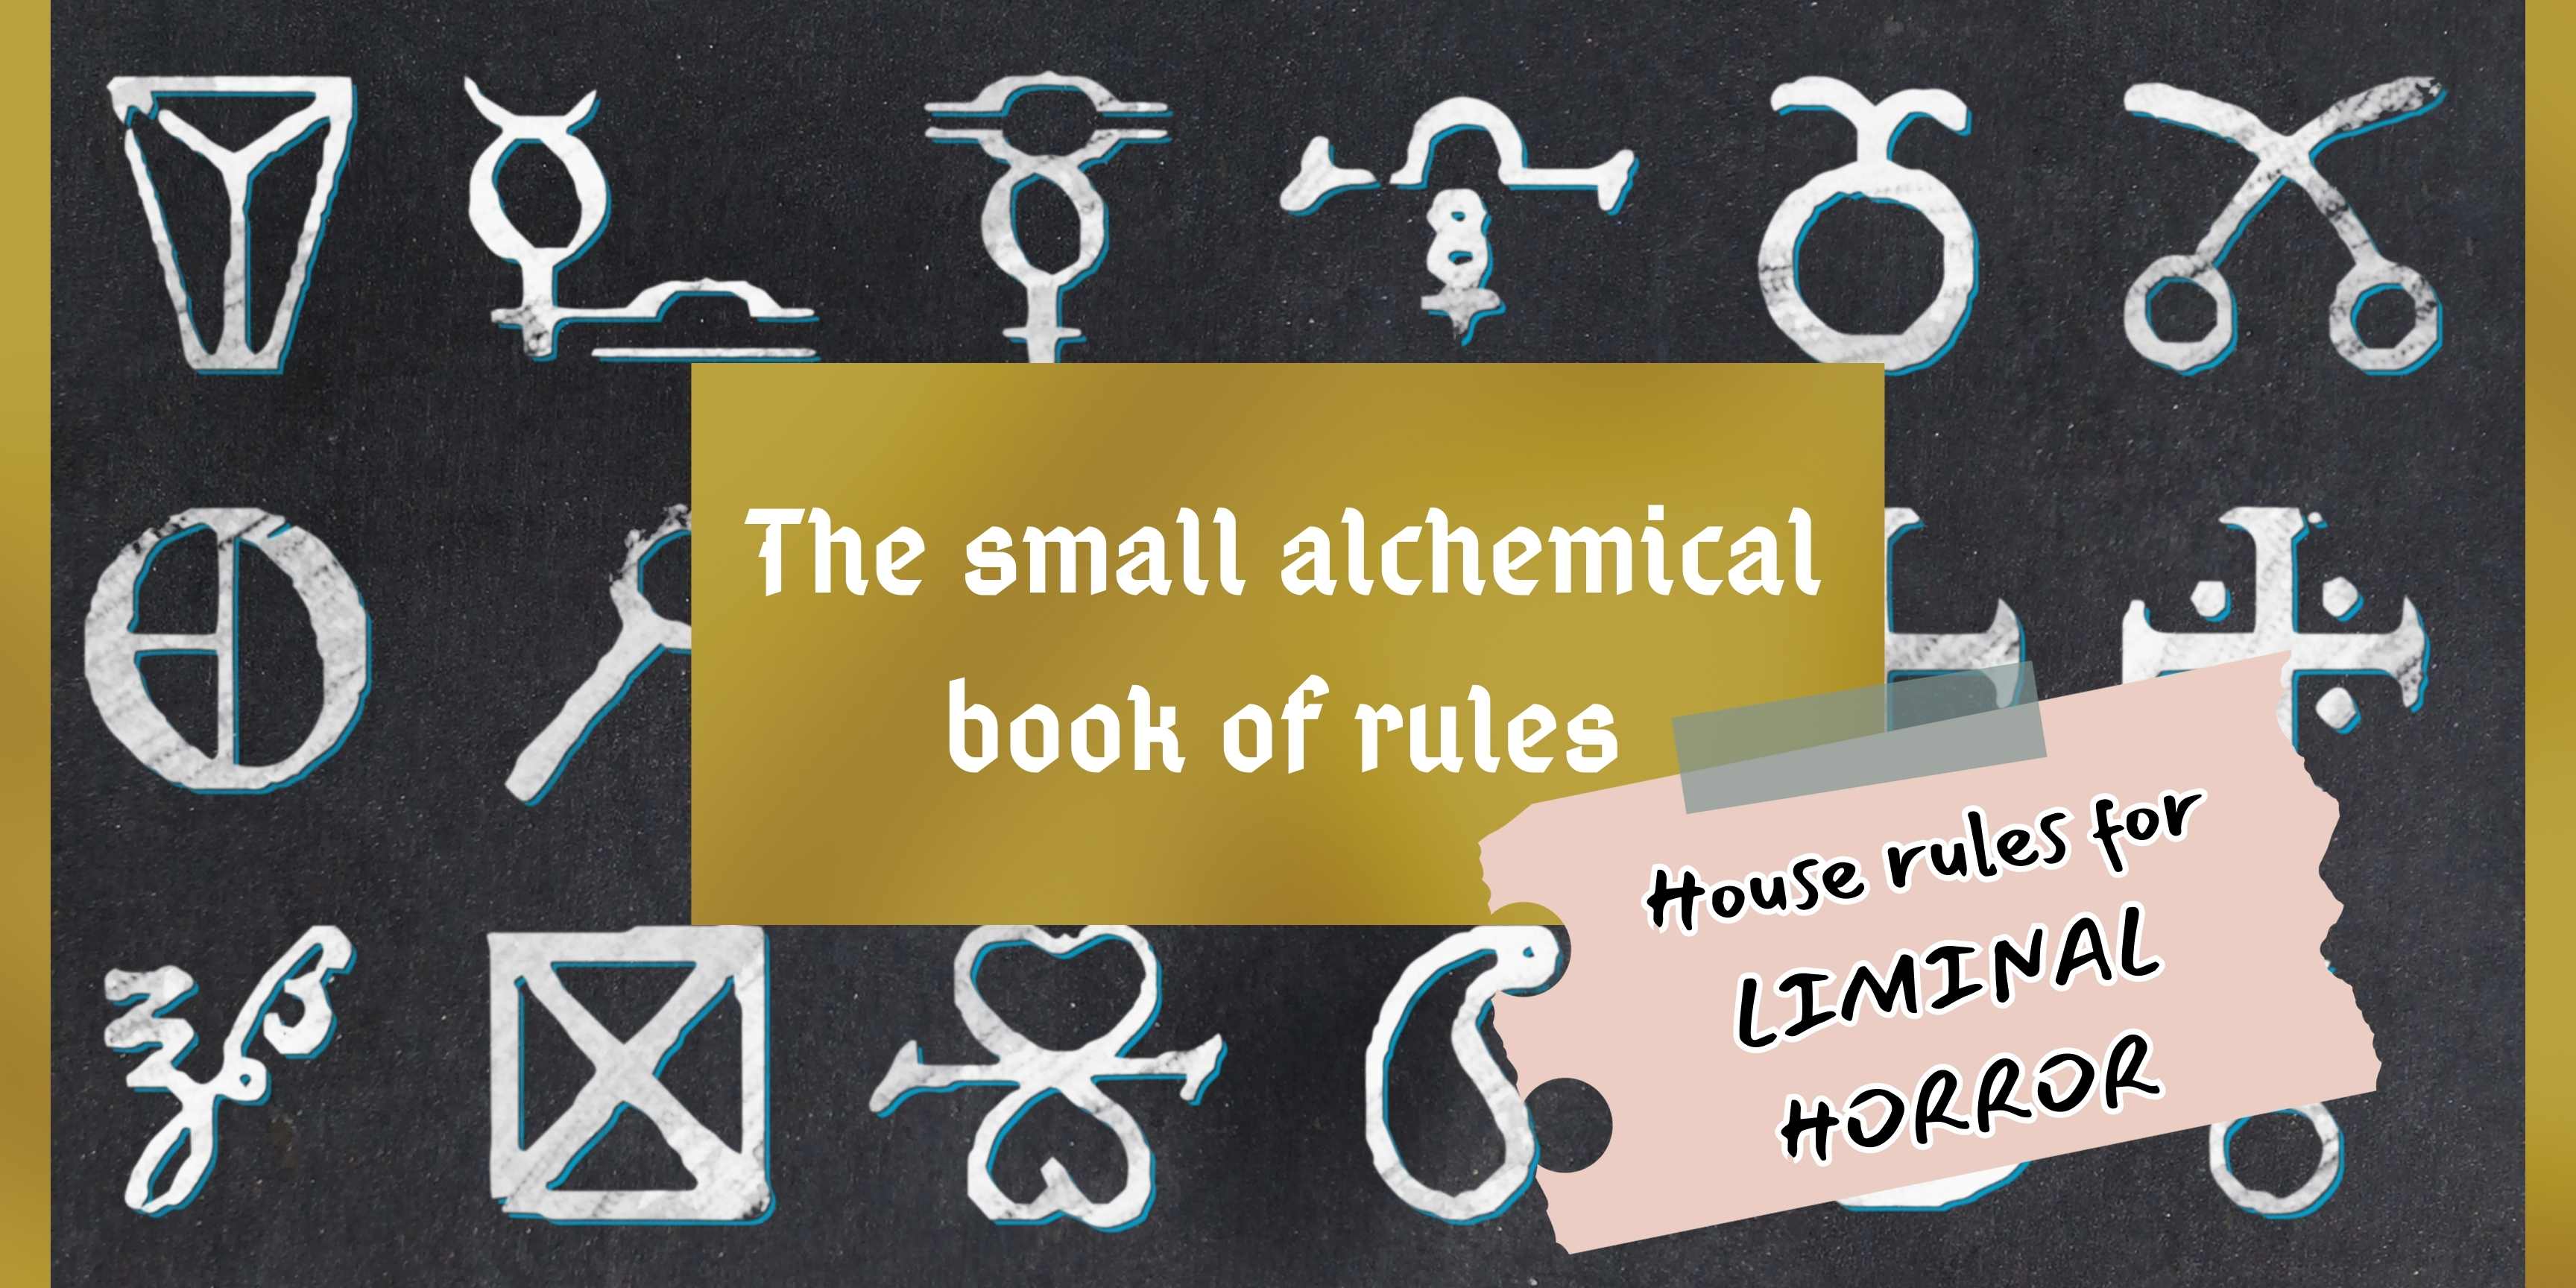 The small alchemical book of rules